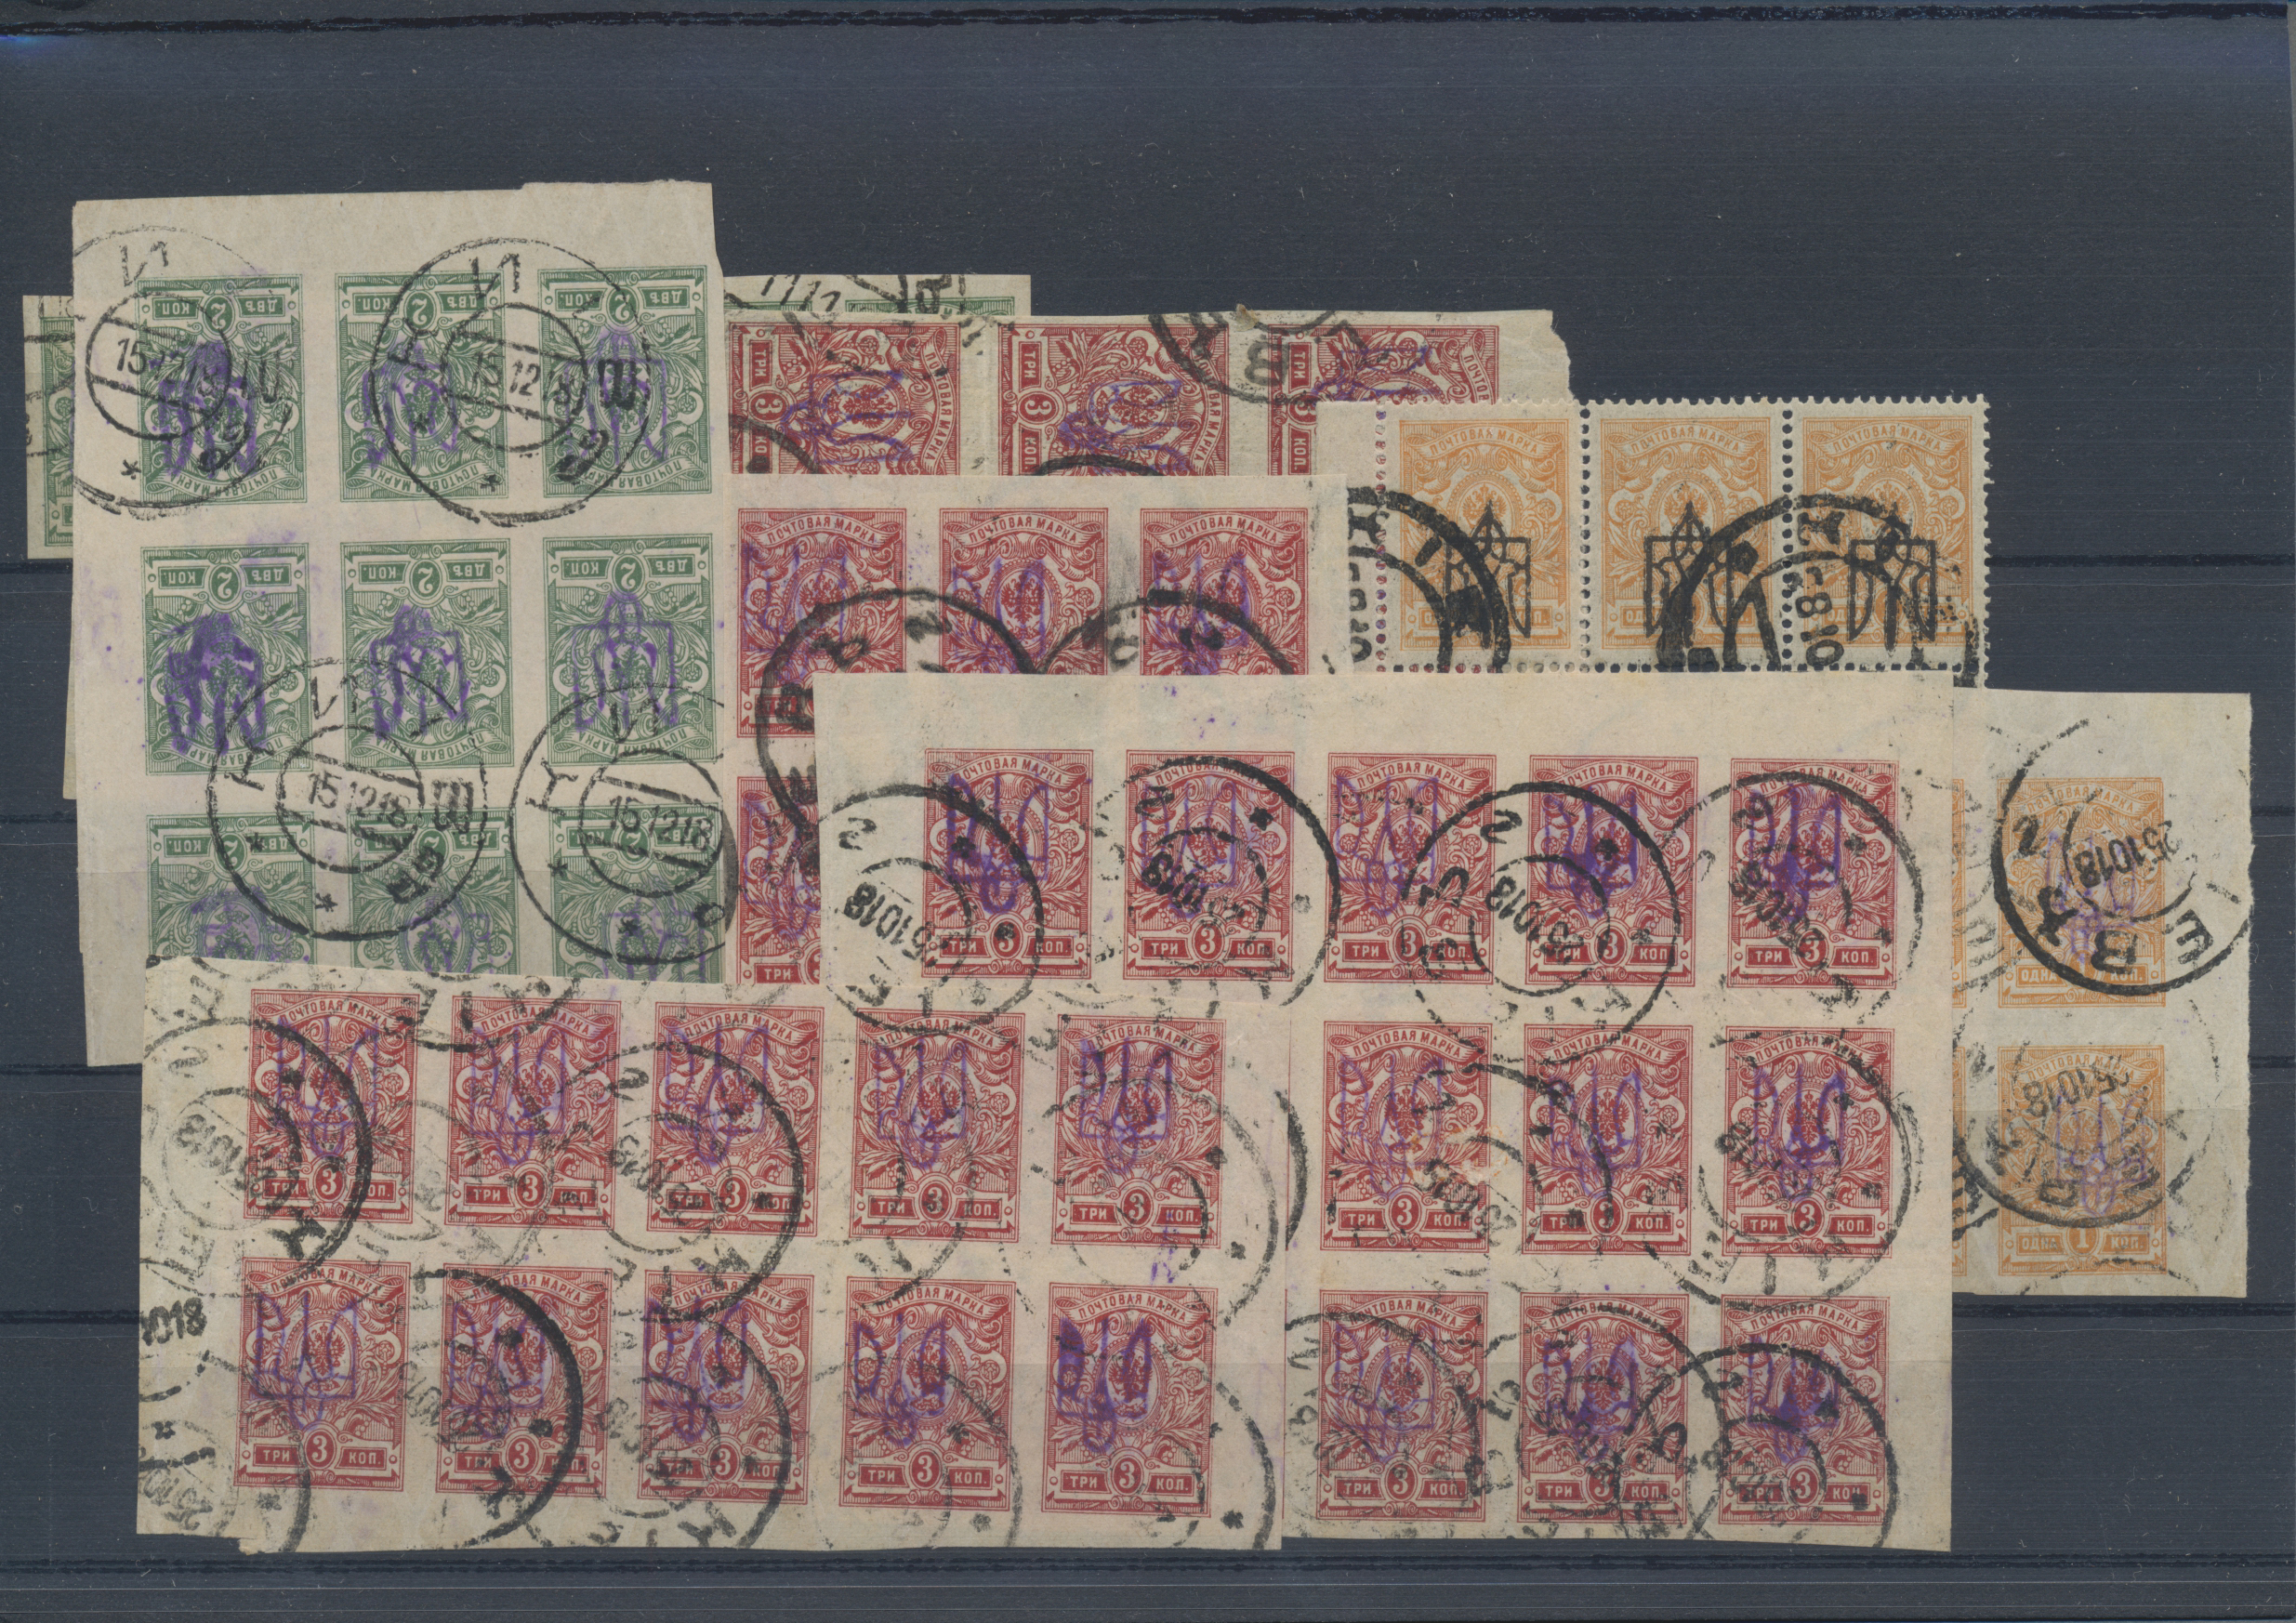 Lot 14946 - russland  -  Auktionshaus Christoph Gärtner GmbH & Co. KG 52nd Auction - Day 5